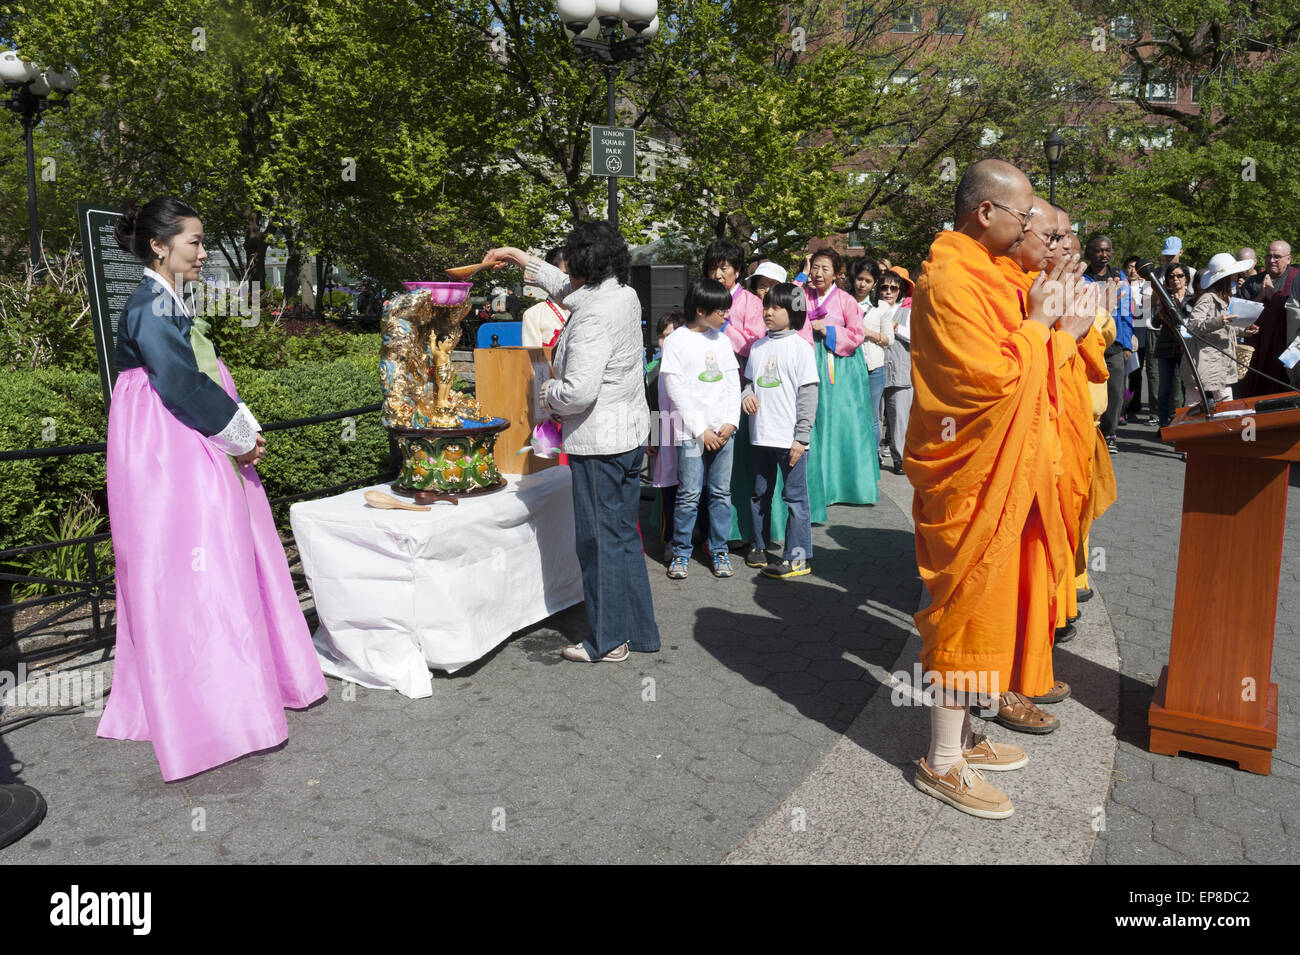 Vesak Celebration at Union Square park, NYC on May 5, 2013. Monks pray as people line up for the ceremony of Bathing the Buddha. Stock Photo